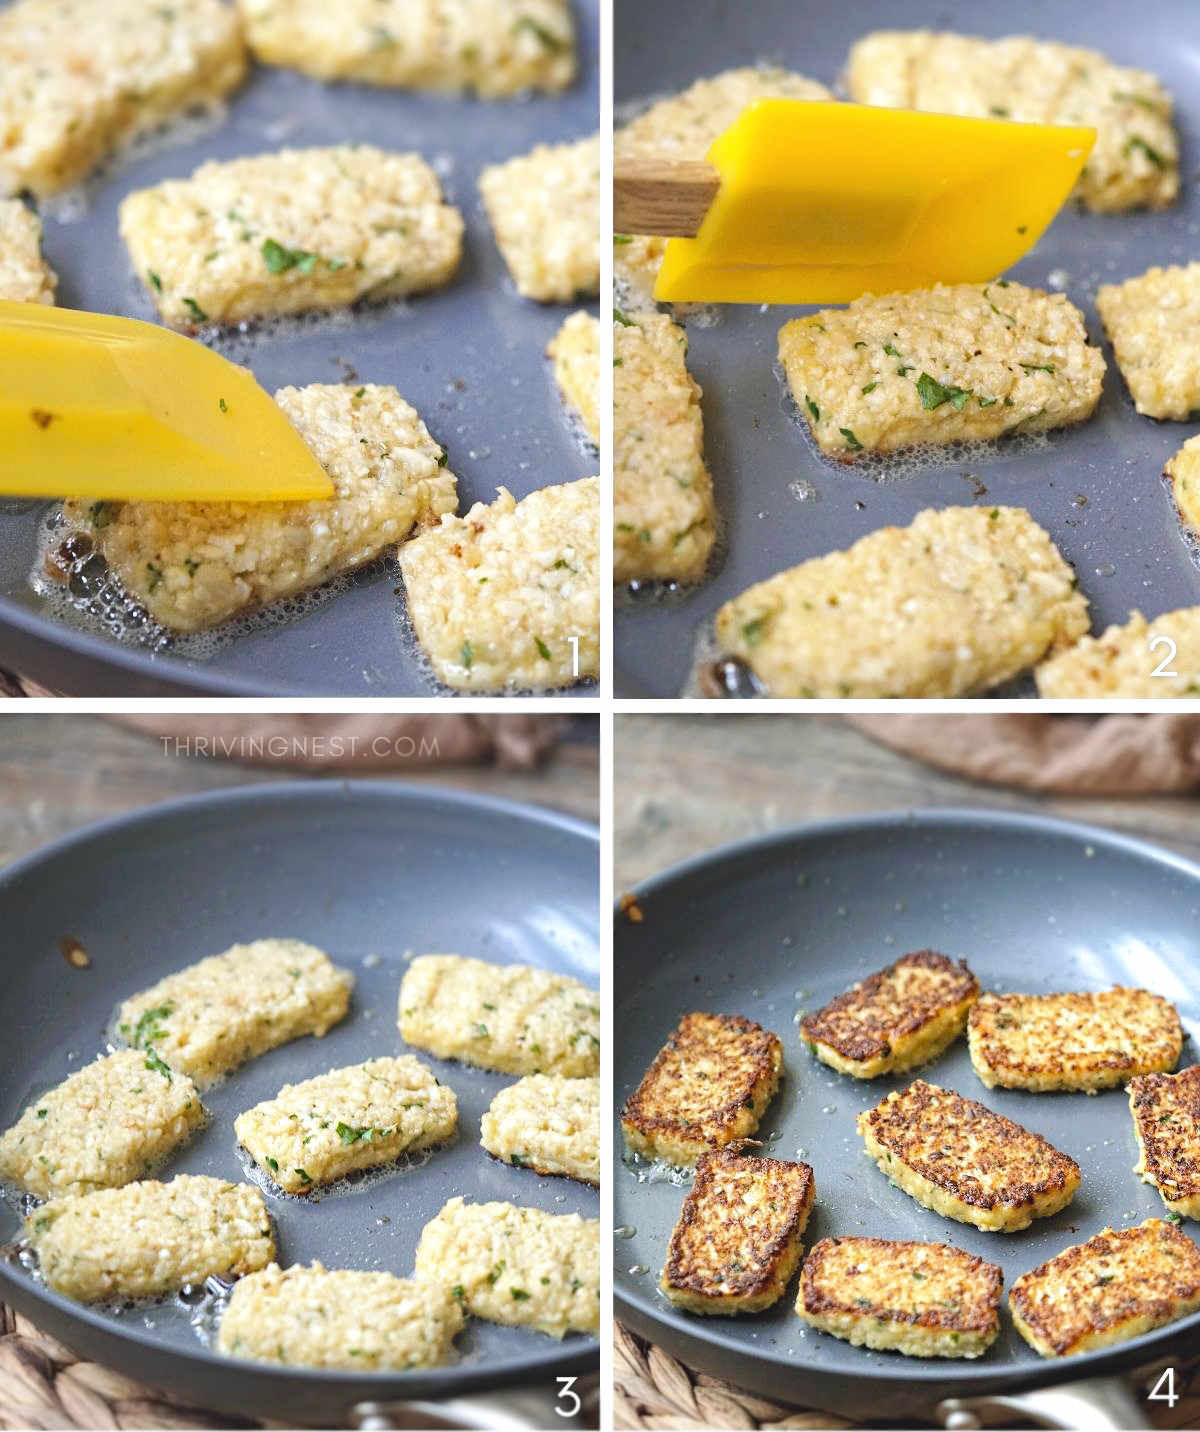 Process shots of how to make cauliflower tots, nuggets or bites for babies as finger food, how to fry in a skillet until golden brown.